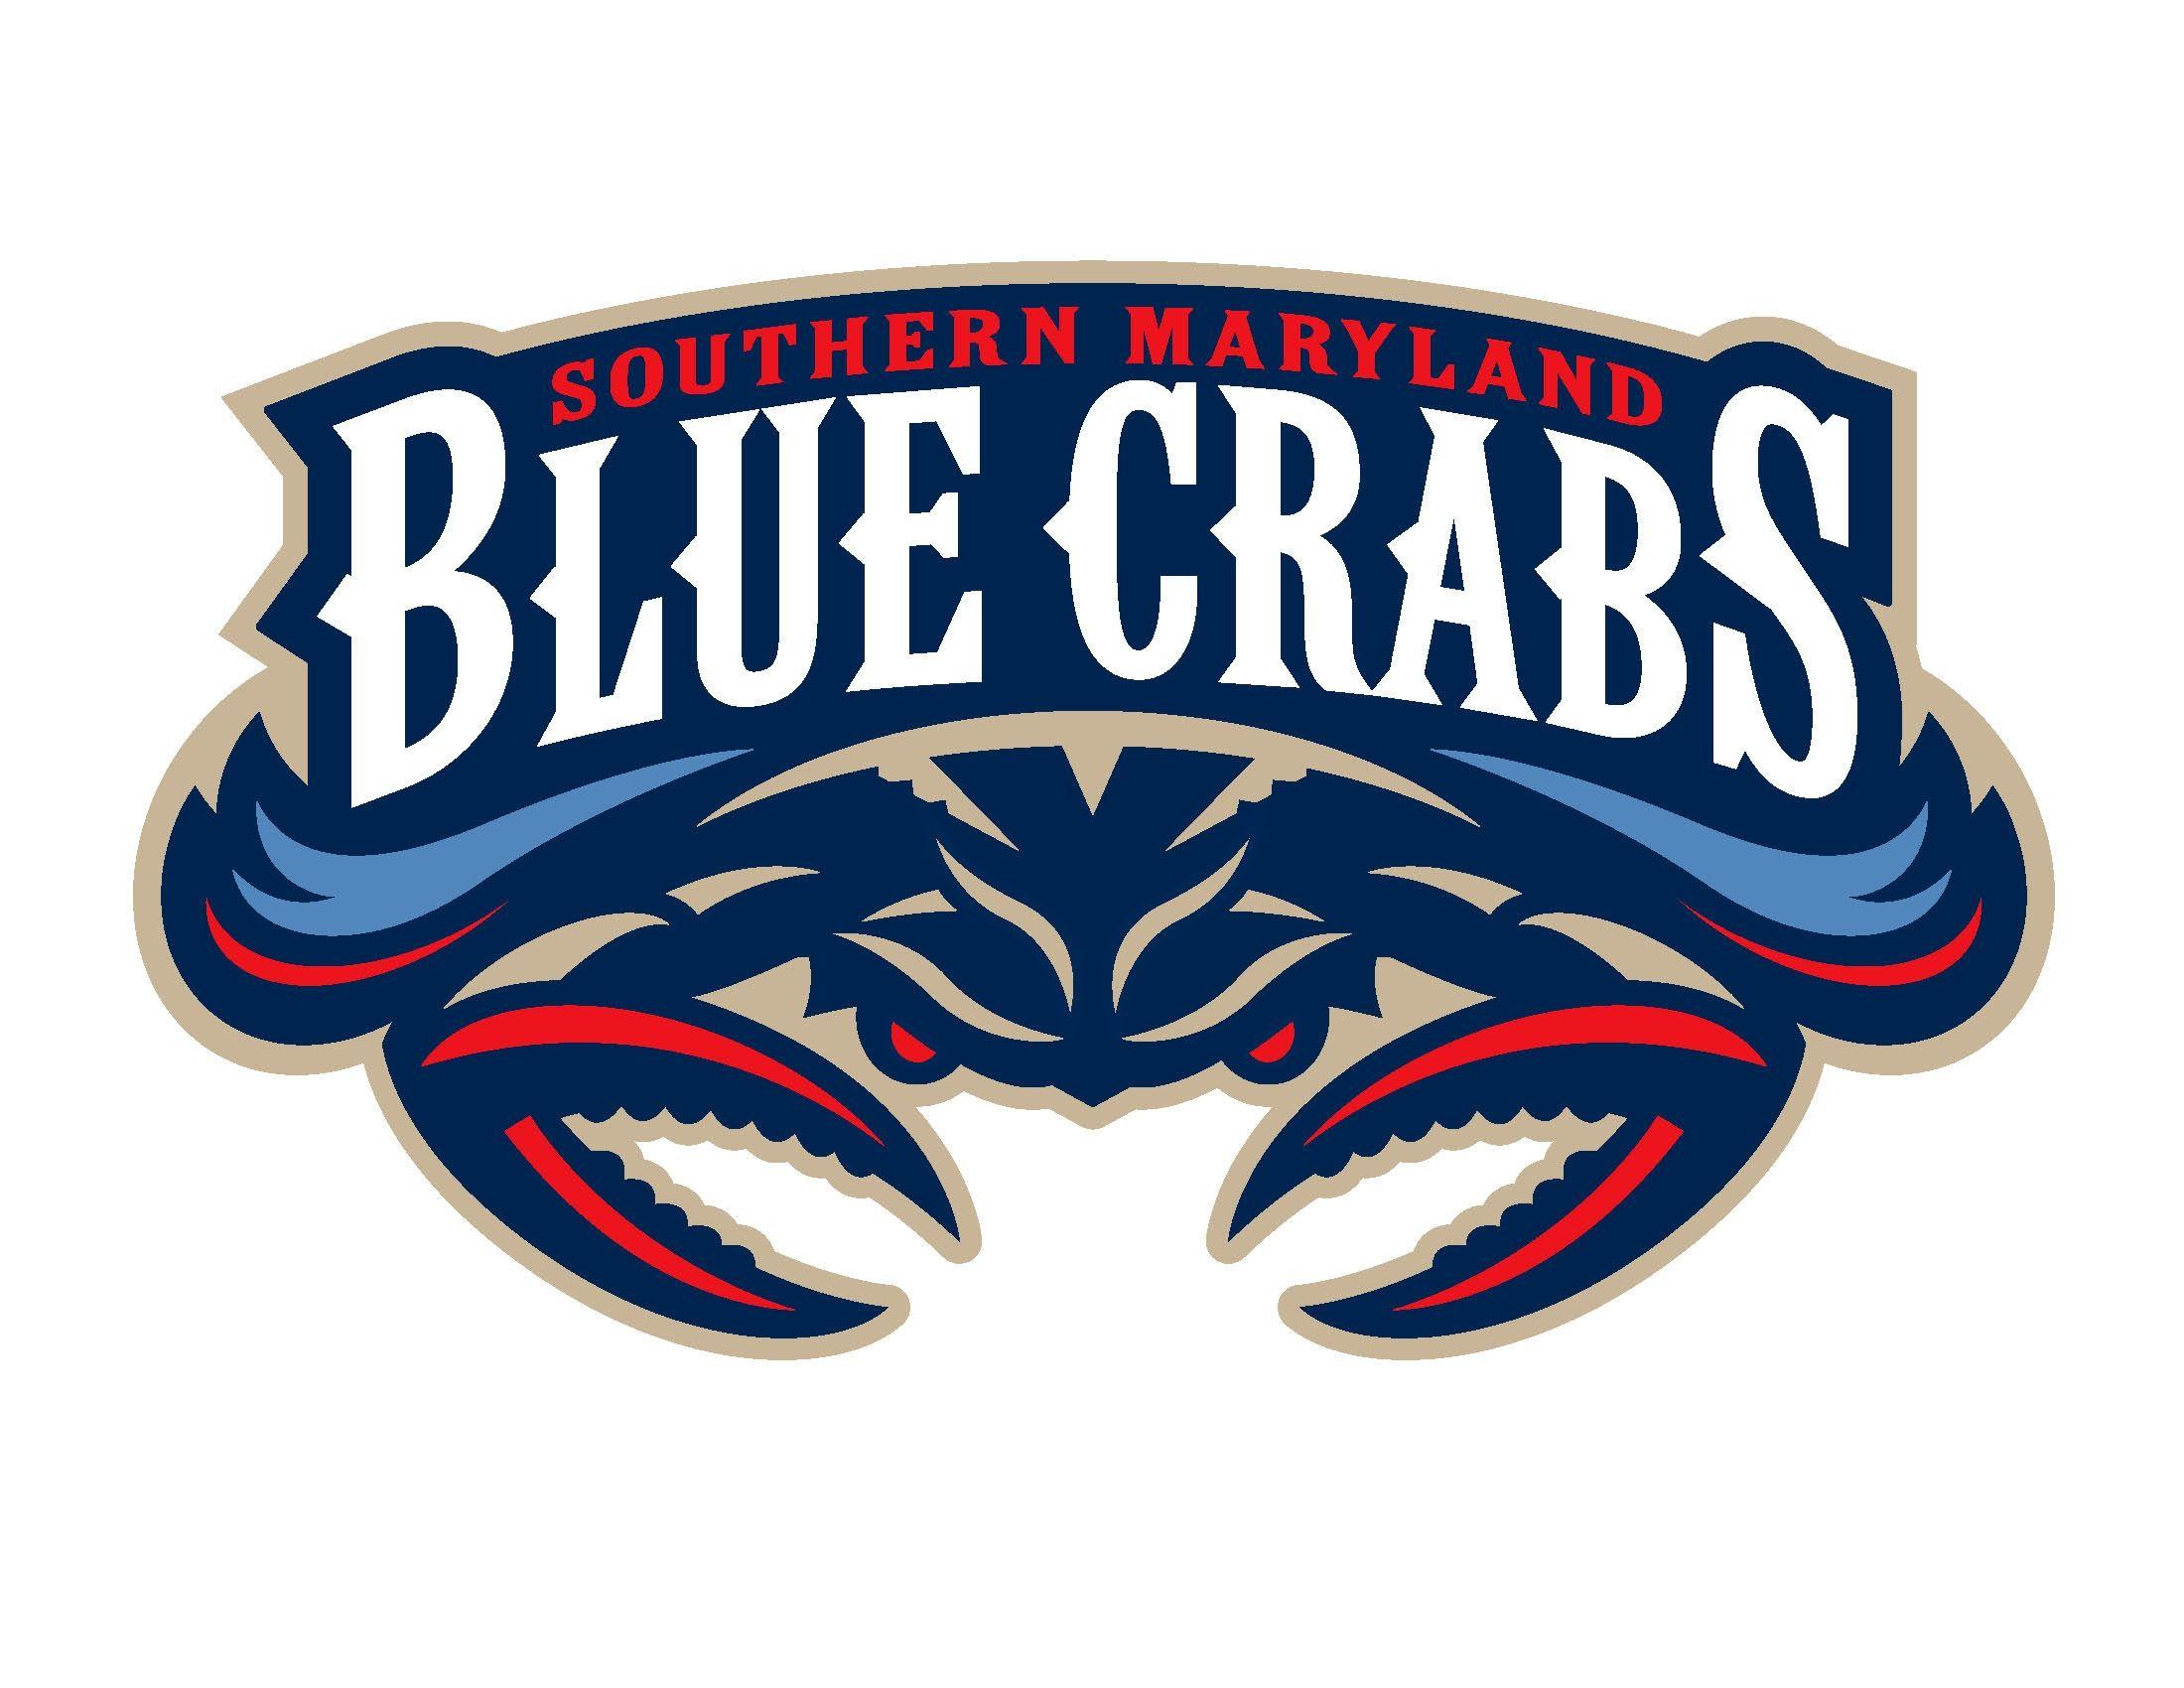 Crab Baseball Logo - Southern Maryland is well known for Blue Crabs and the team plays